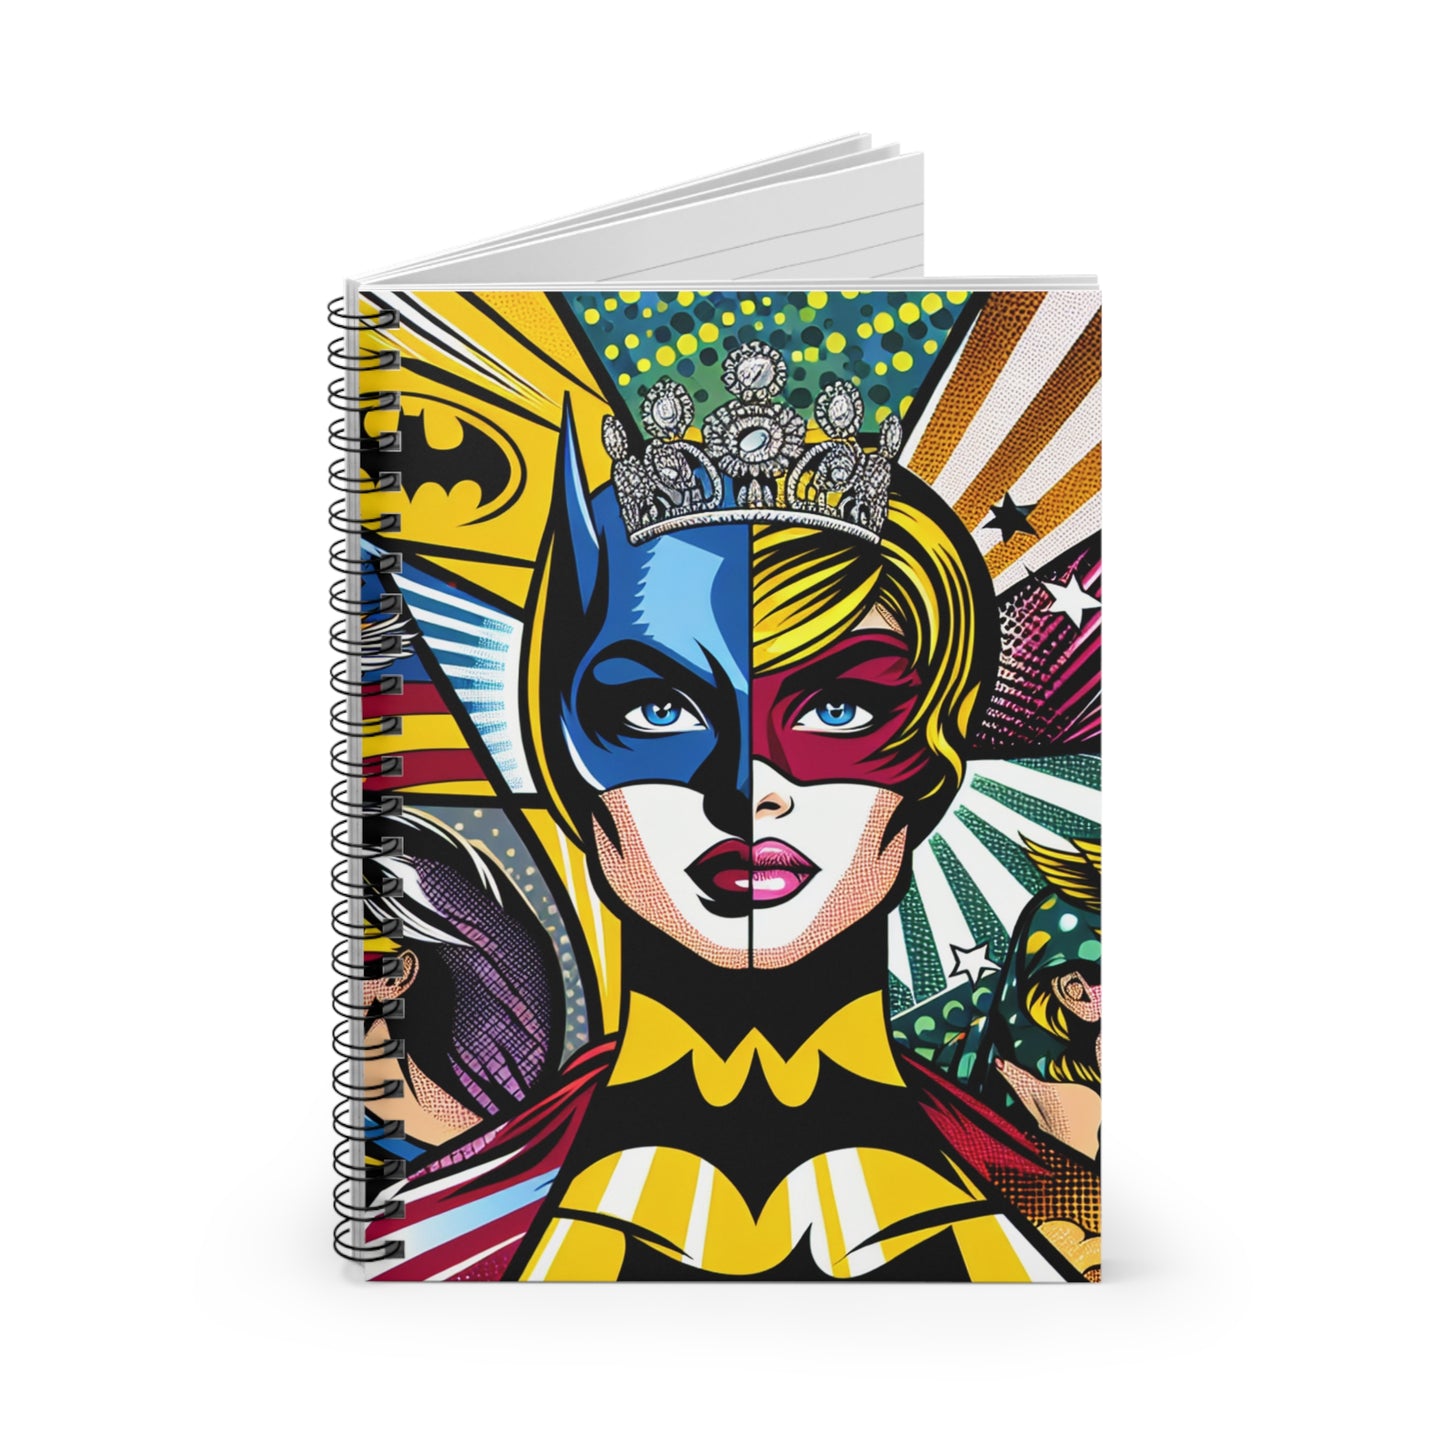 "Heroes of Pop Art: An Intermixing of Icons" - The Alien Spiral Notebook (Ruled Line) Pop Art Style